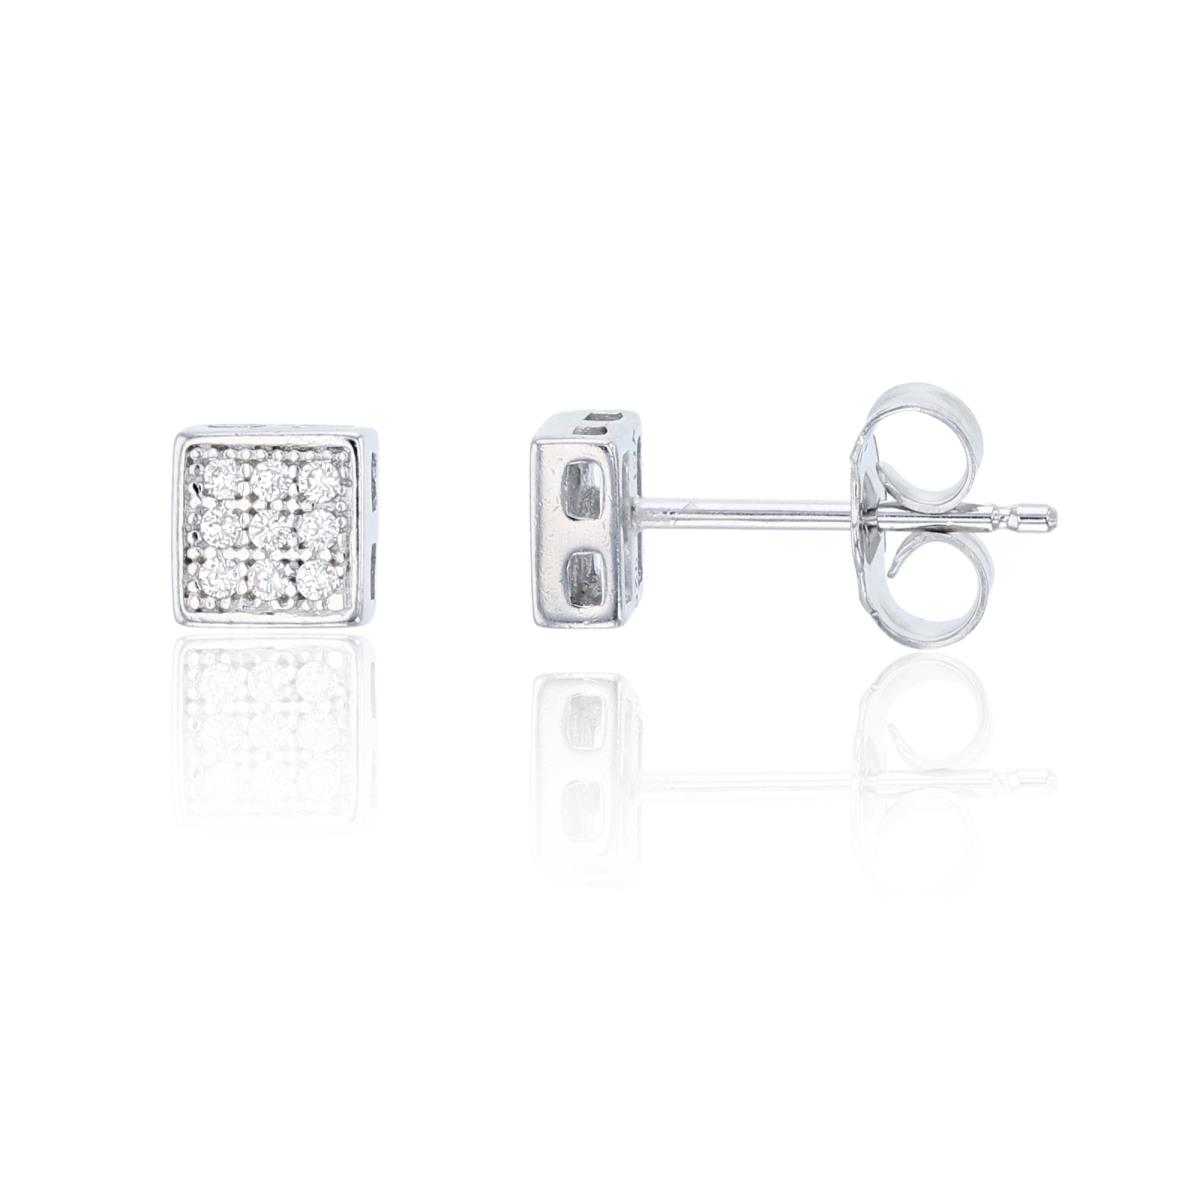 Sterling Silver Rdodium  3x3mm Pave Square Stud Earring